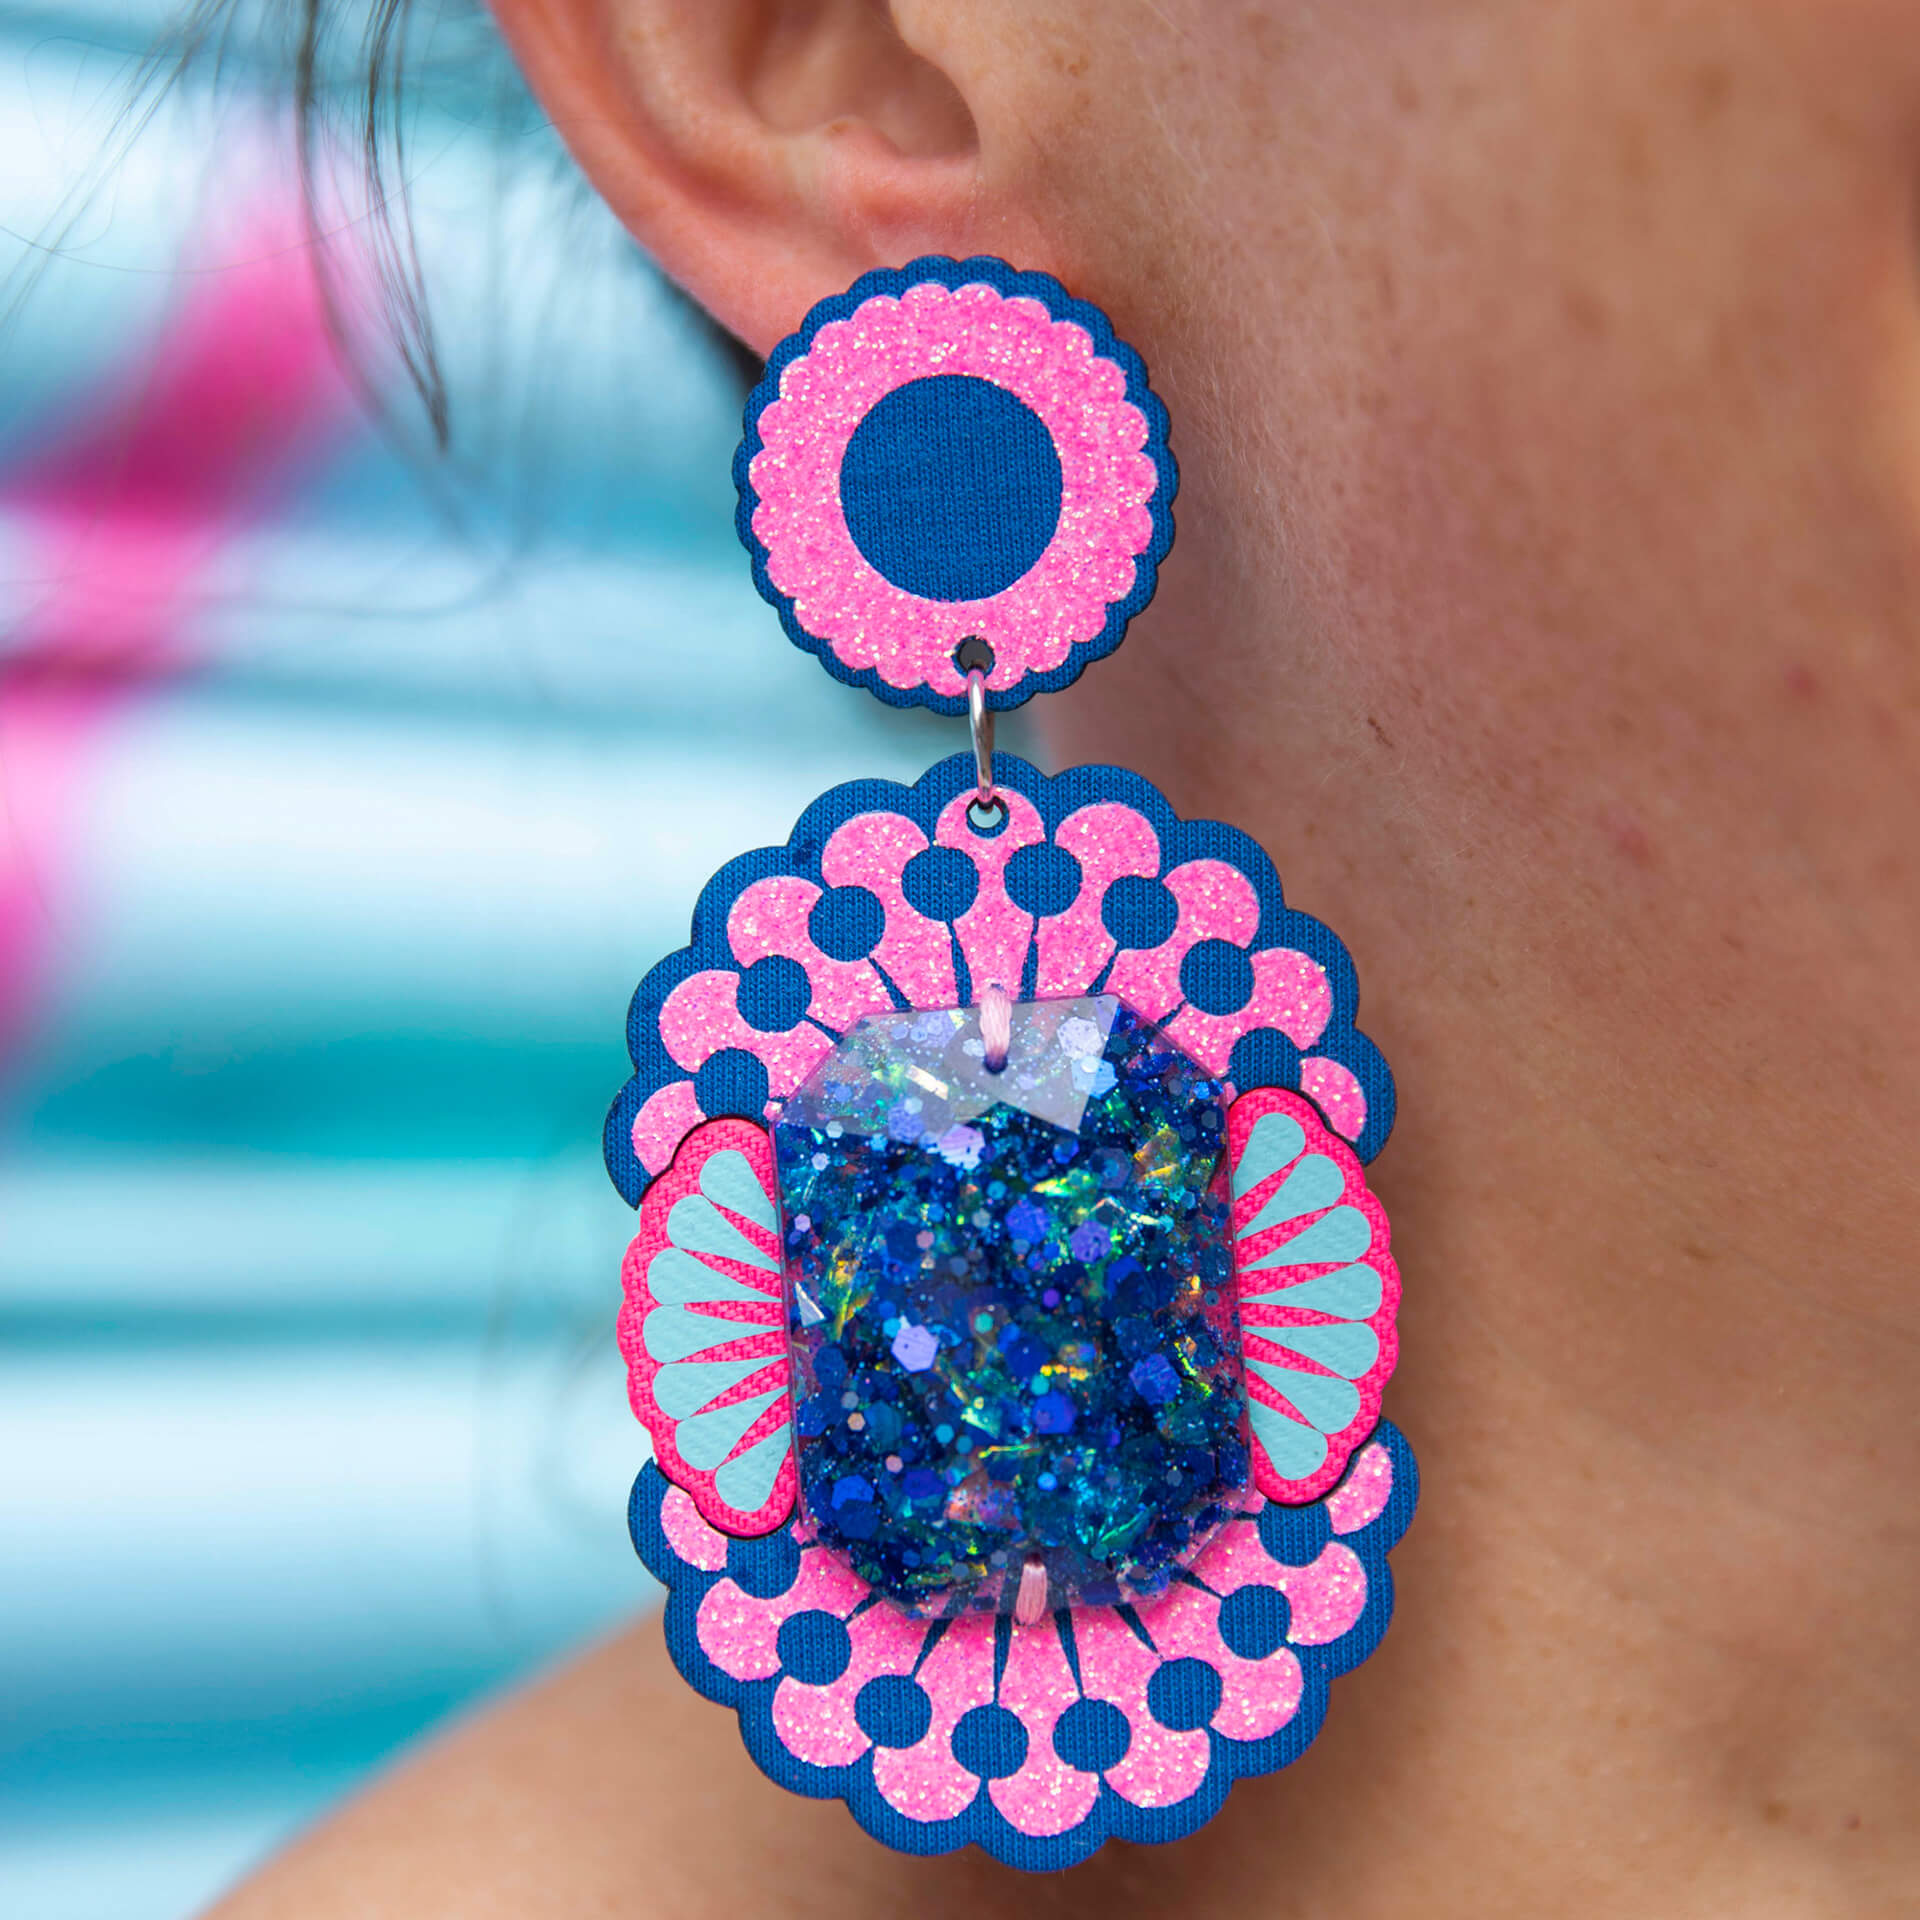 Discover more than 251 bubblegum pink earrings super hot